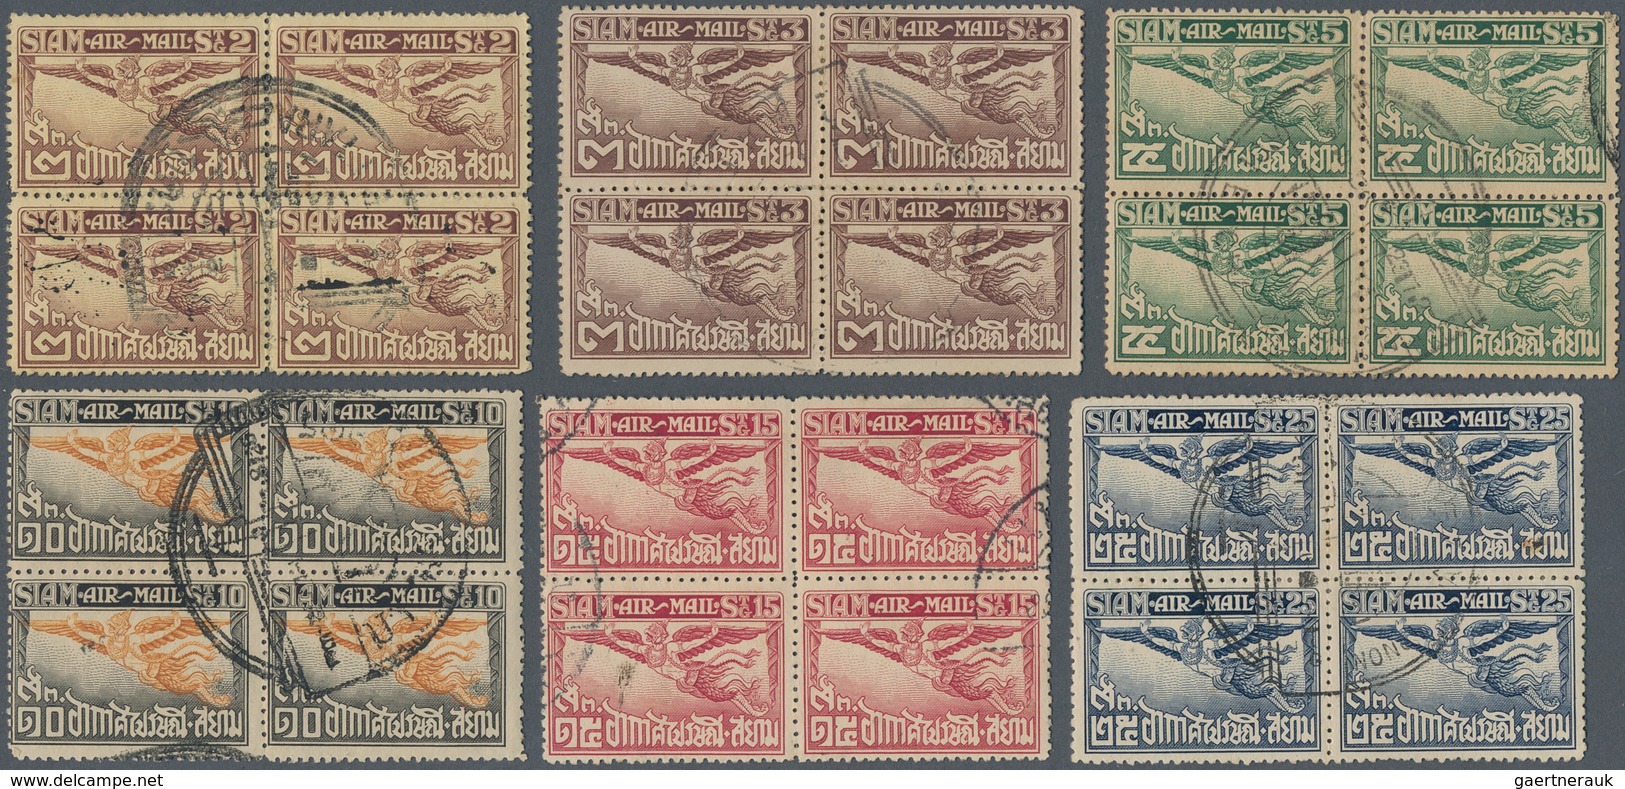 Thailand: 1925, Airmail Stamps 2 S To 1 B, Perforation 14 - 15 In Cancelled Blocks Of Four. - Thailand